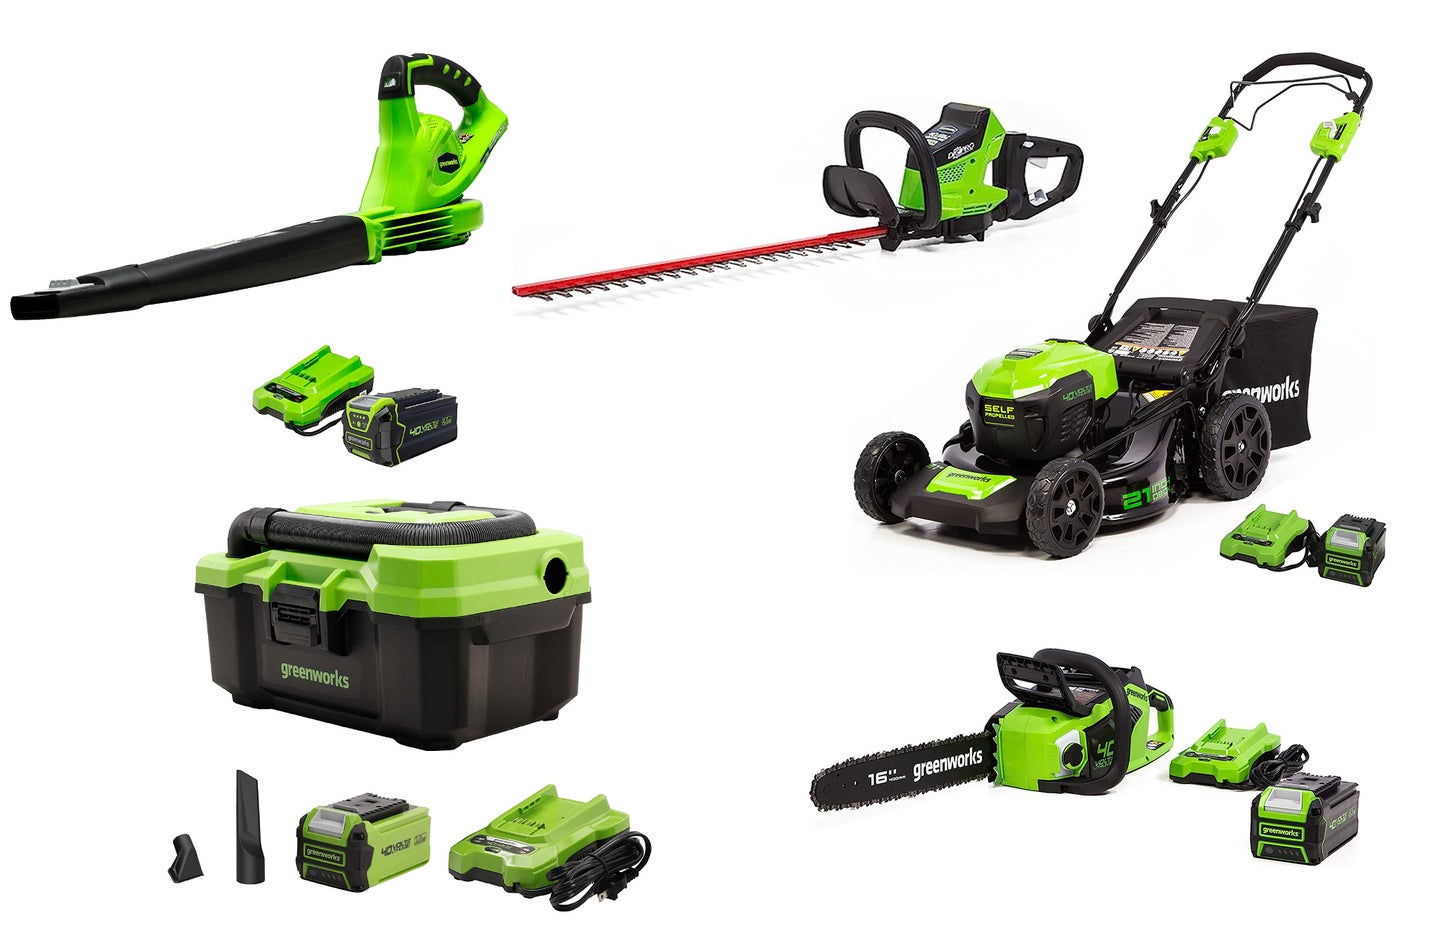 Greenworks has great deals on electric lawn mowers, power tools, and more this Amazon Prime Day.